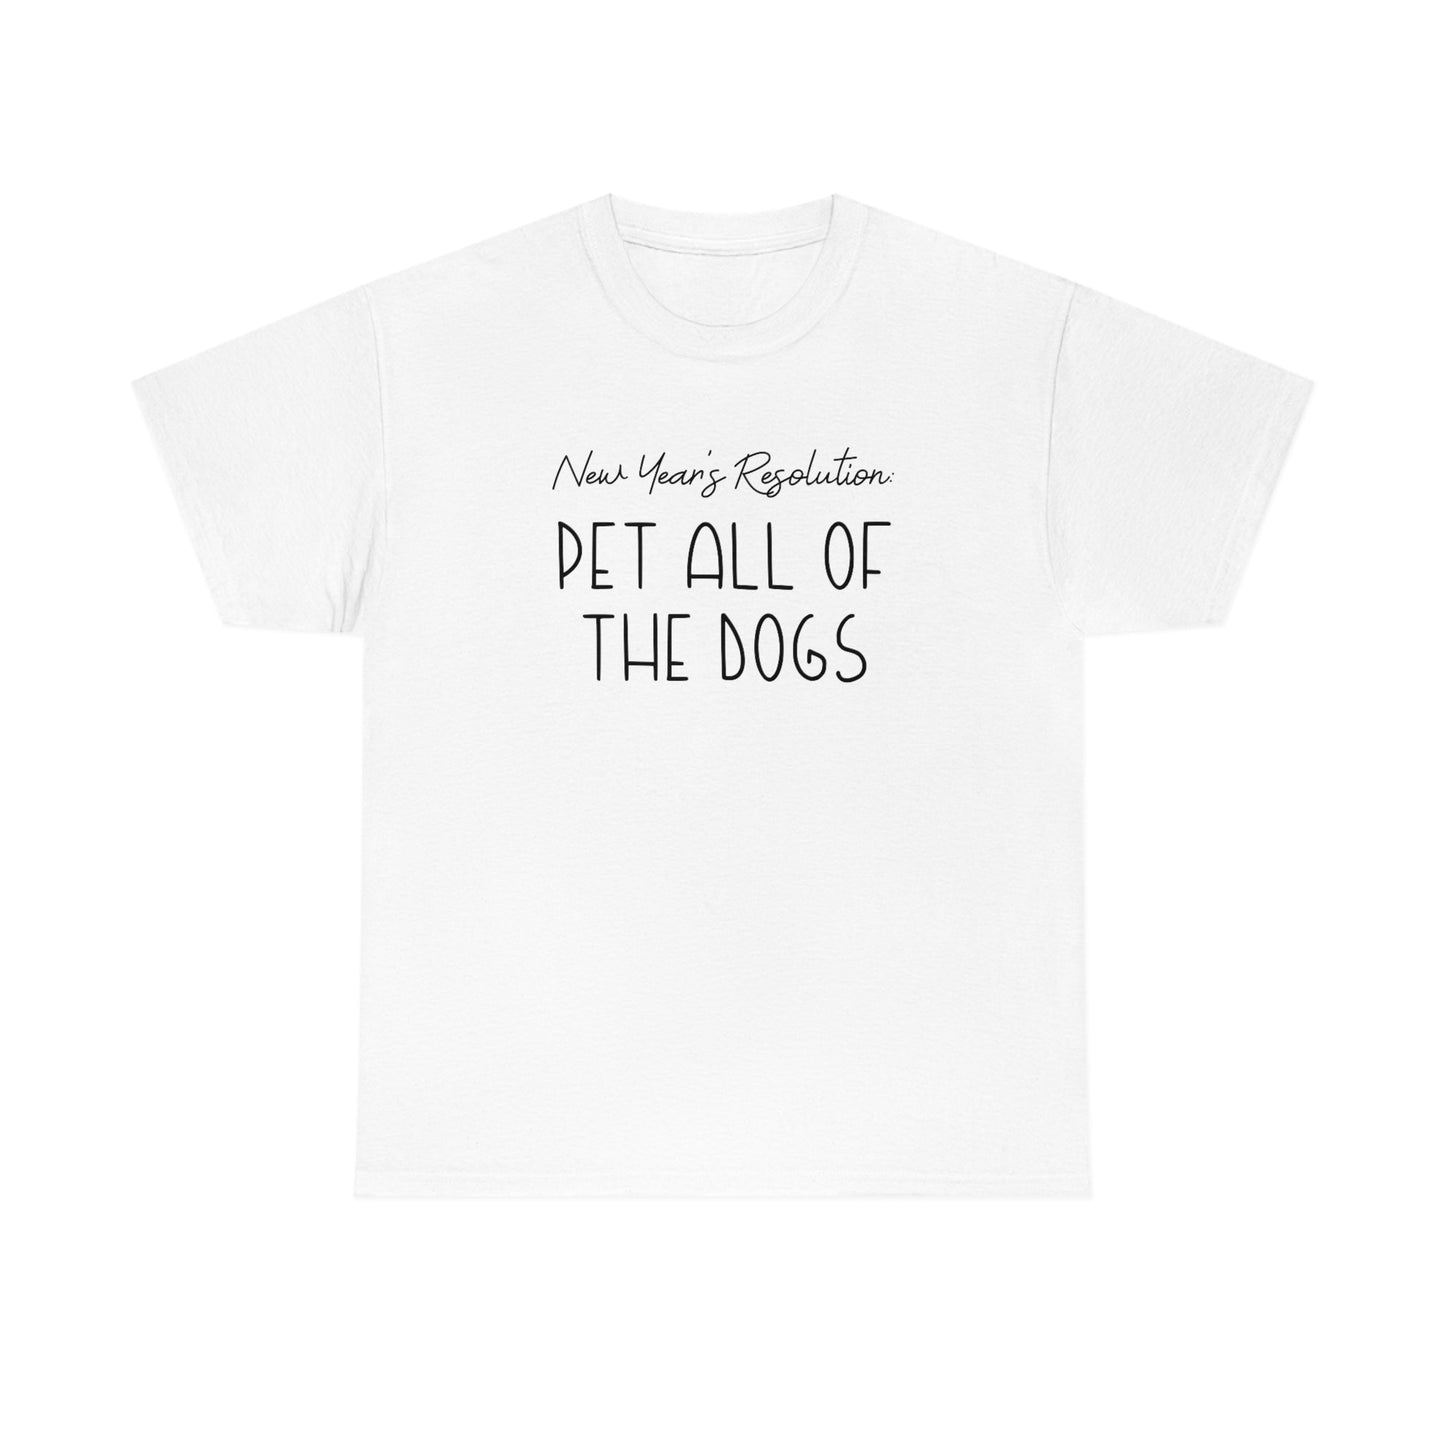 New Year's Resolution: Pet All Of The Dogs | Text Tees - Detezi Designs-28921859125448942100